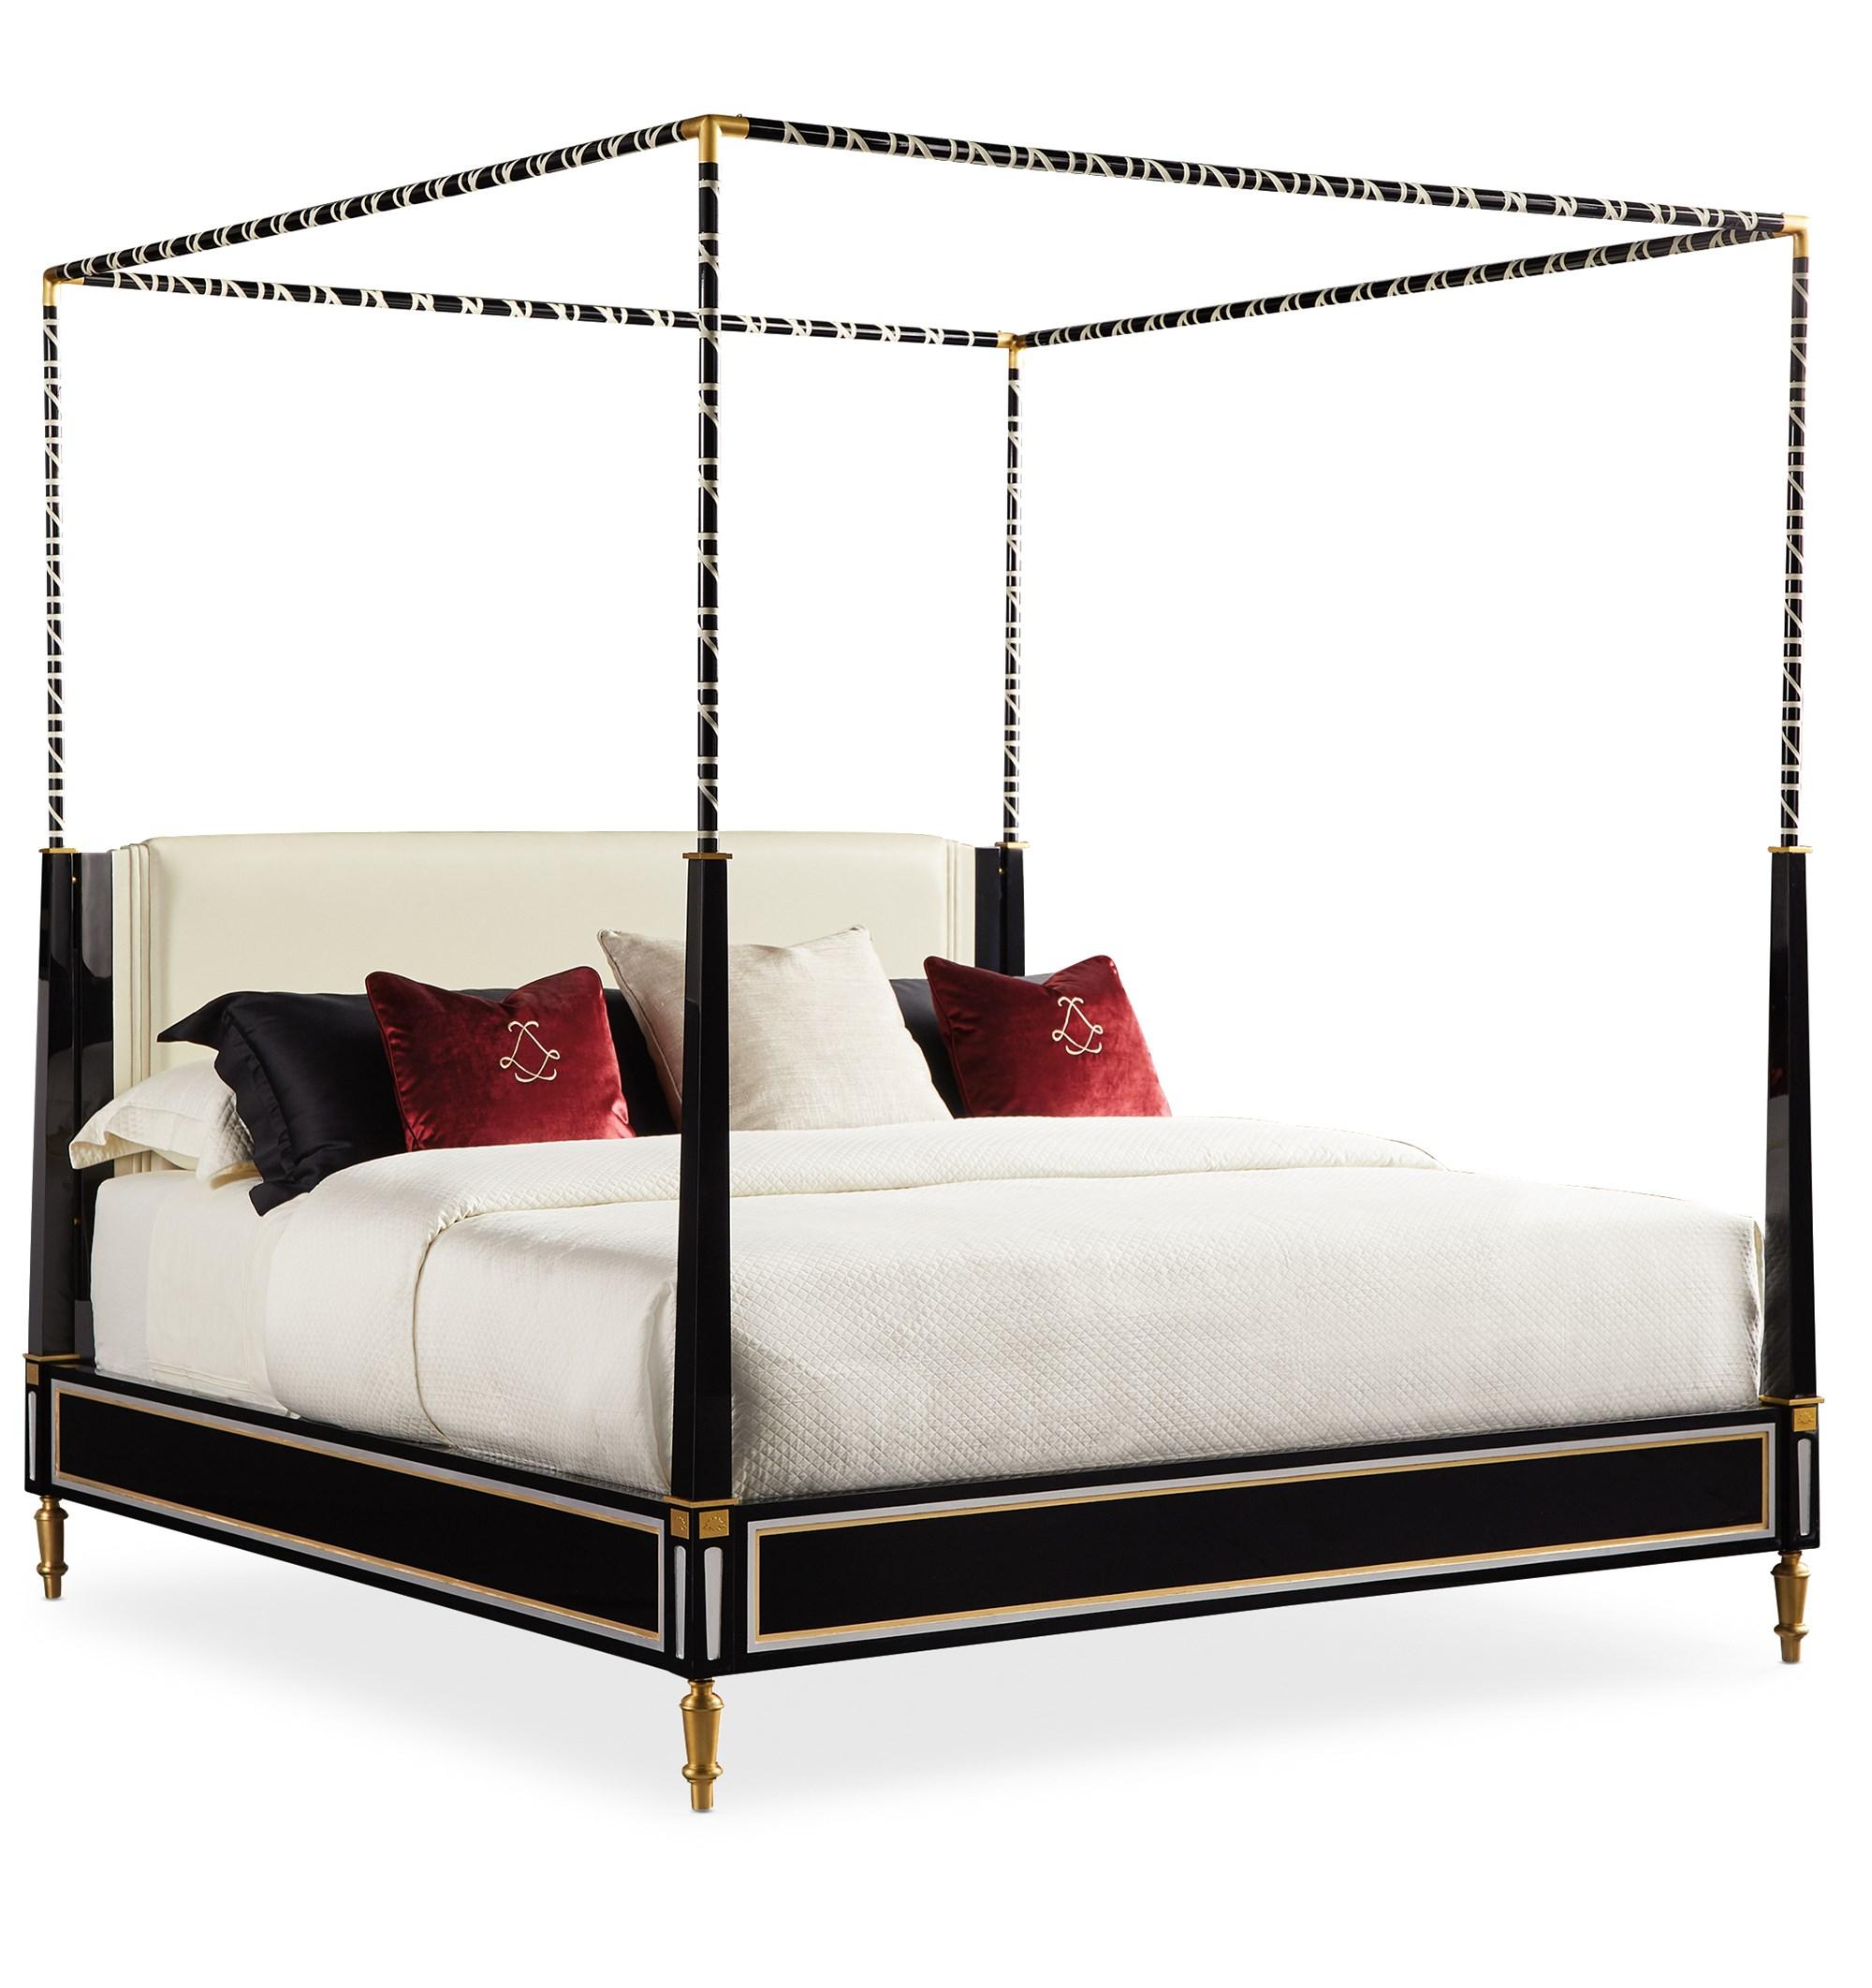 

    
Creme Leather & Black Lacquer Finish King Size THE COUTURIER CANOPY BED by Caracole
